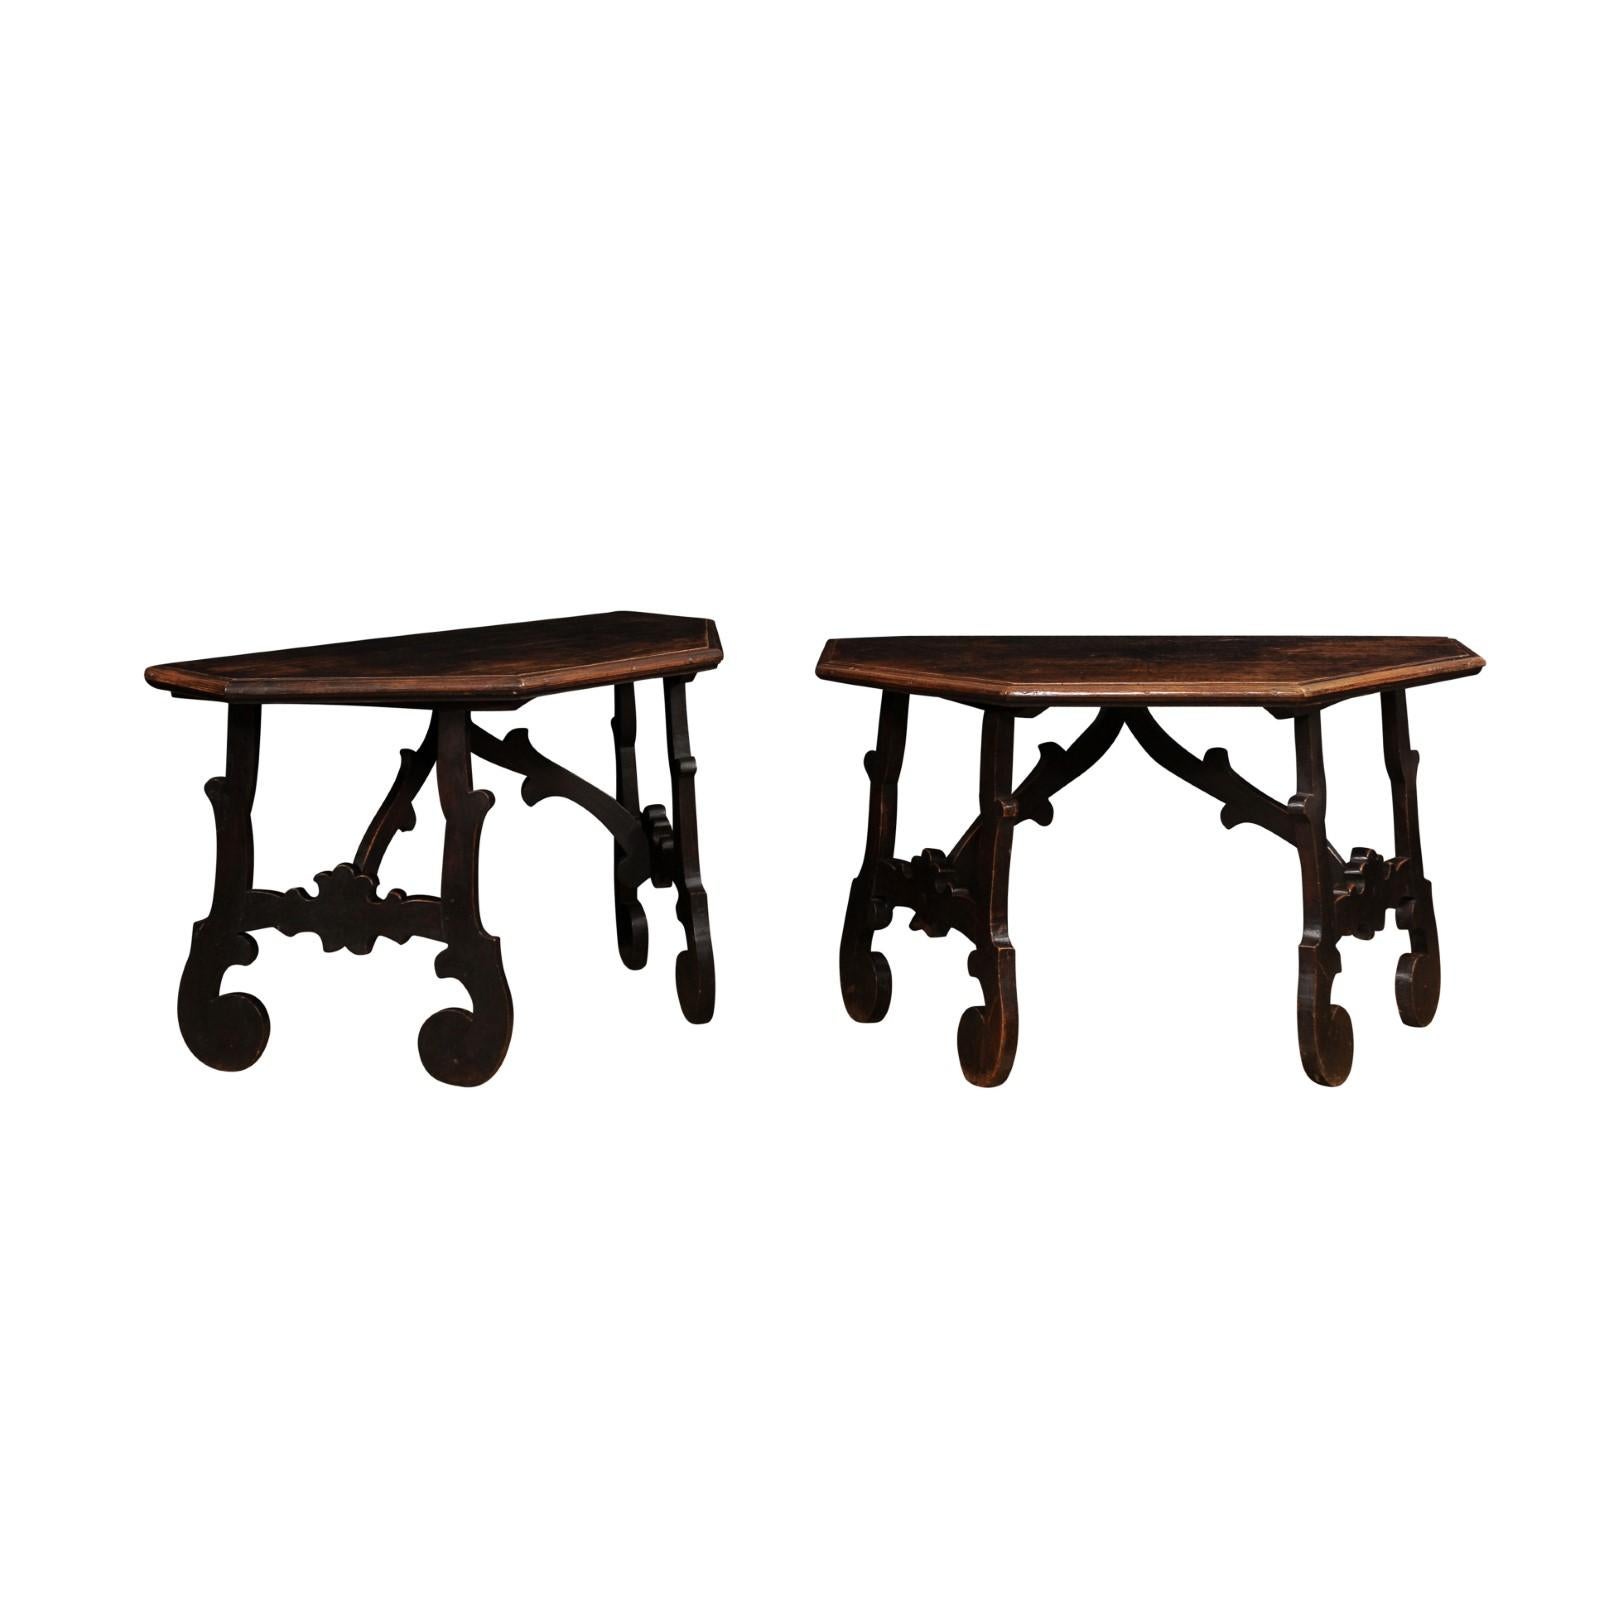 A pair of Italian Baroque period walnut Fratino console tables from the 17th century with carved lyre shaped bases and very authentic rustic character. This captivating pair of Italian Baroque period walnut Fratino console tables, dating back to the